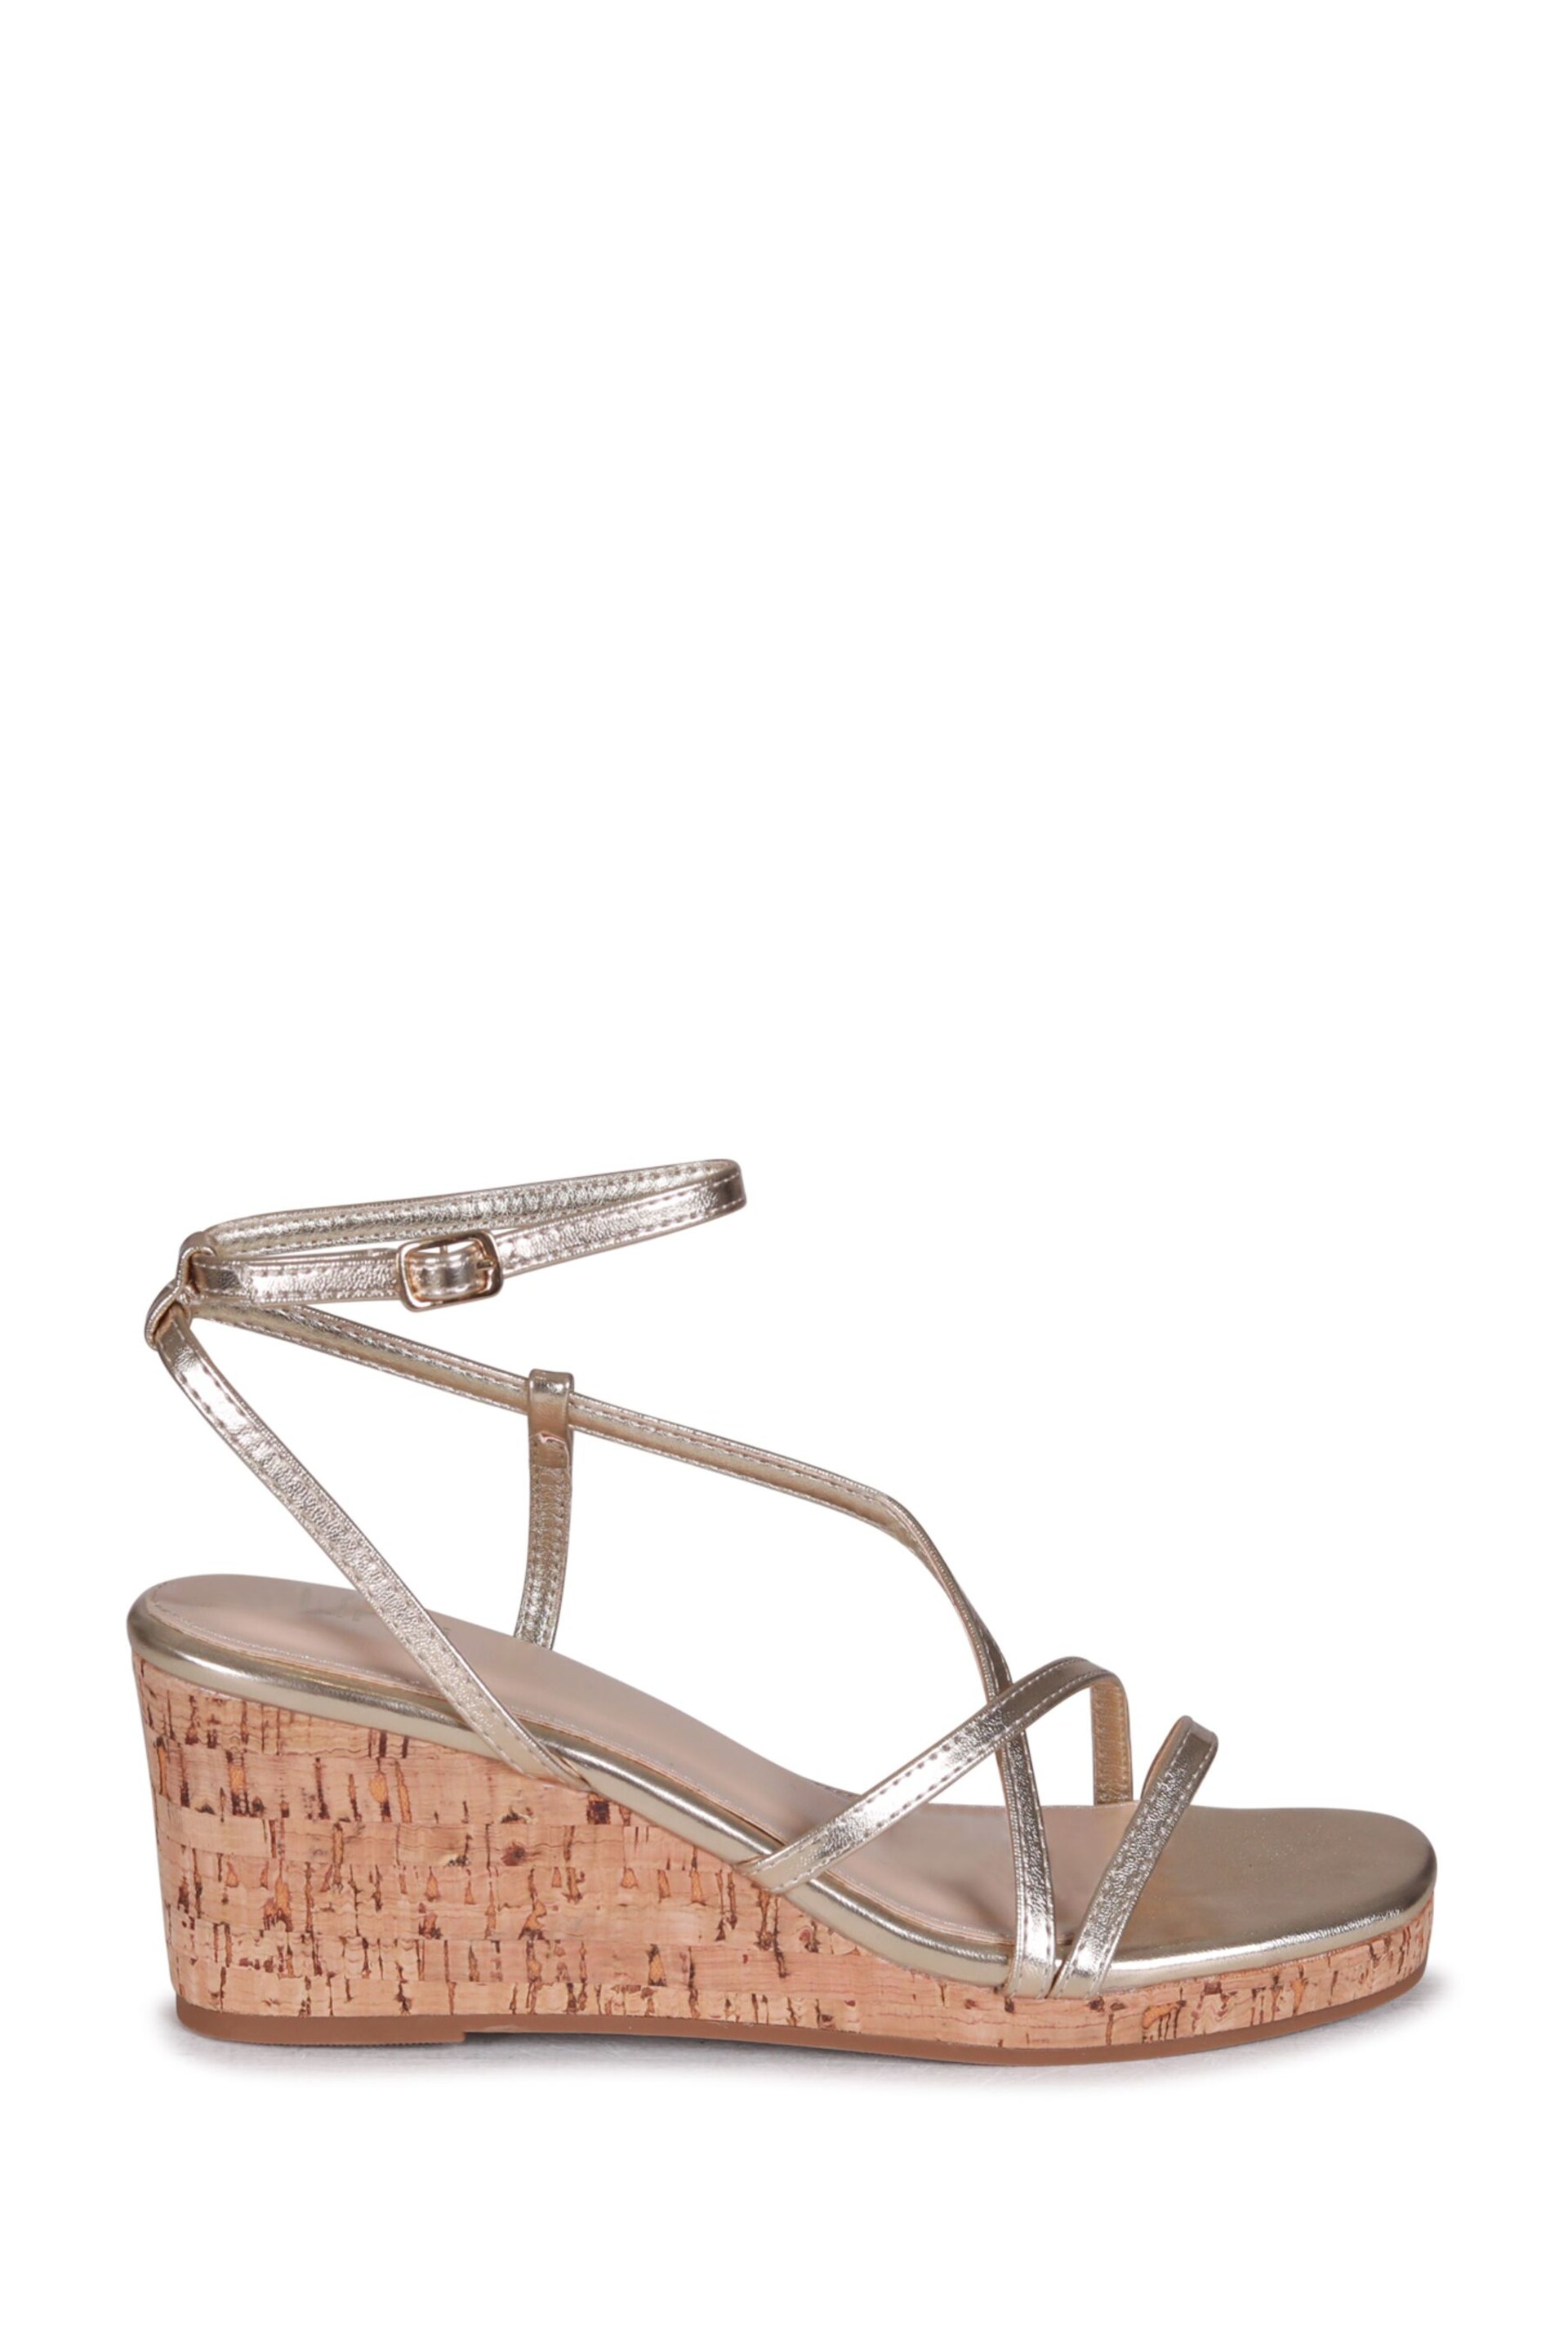 Linzi Gold Aminah Strappy Wedge Sandal With Wrap Around Ankle Strap - Image 2 of 4